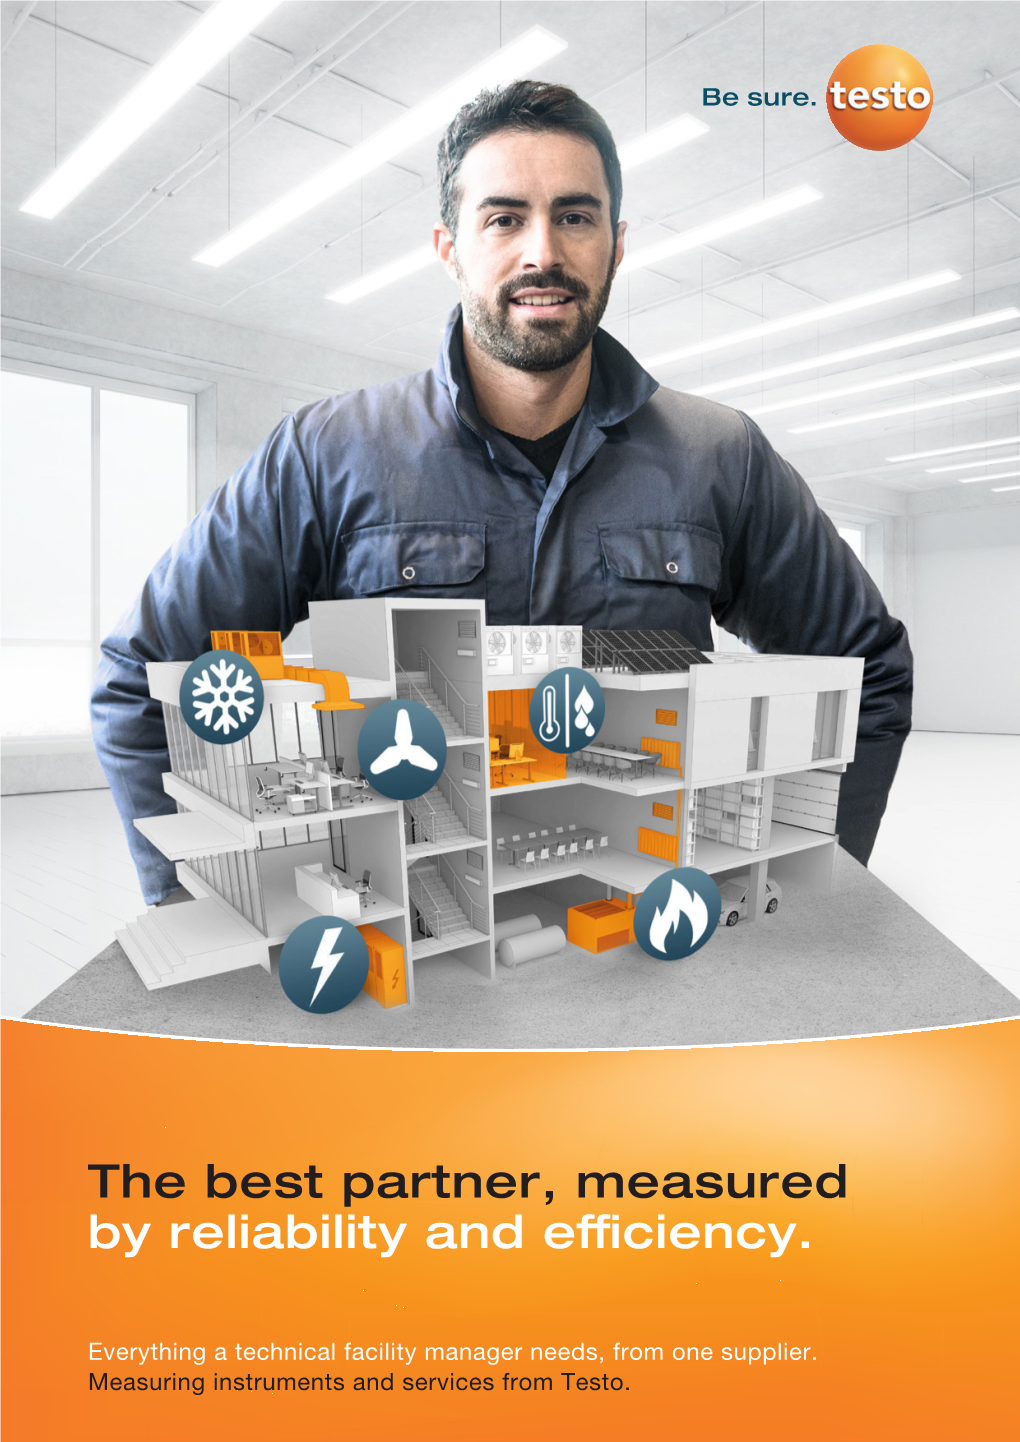 The Best Partner, Measured by Reliability and Efficiency